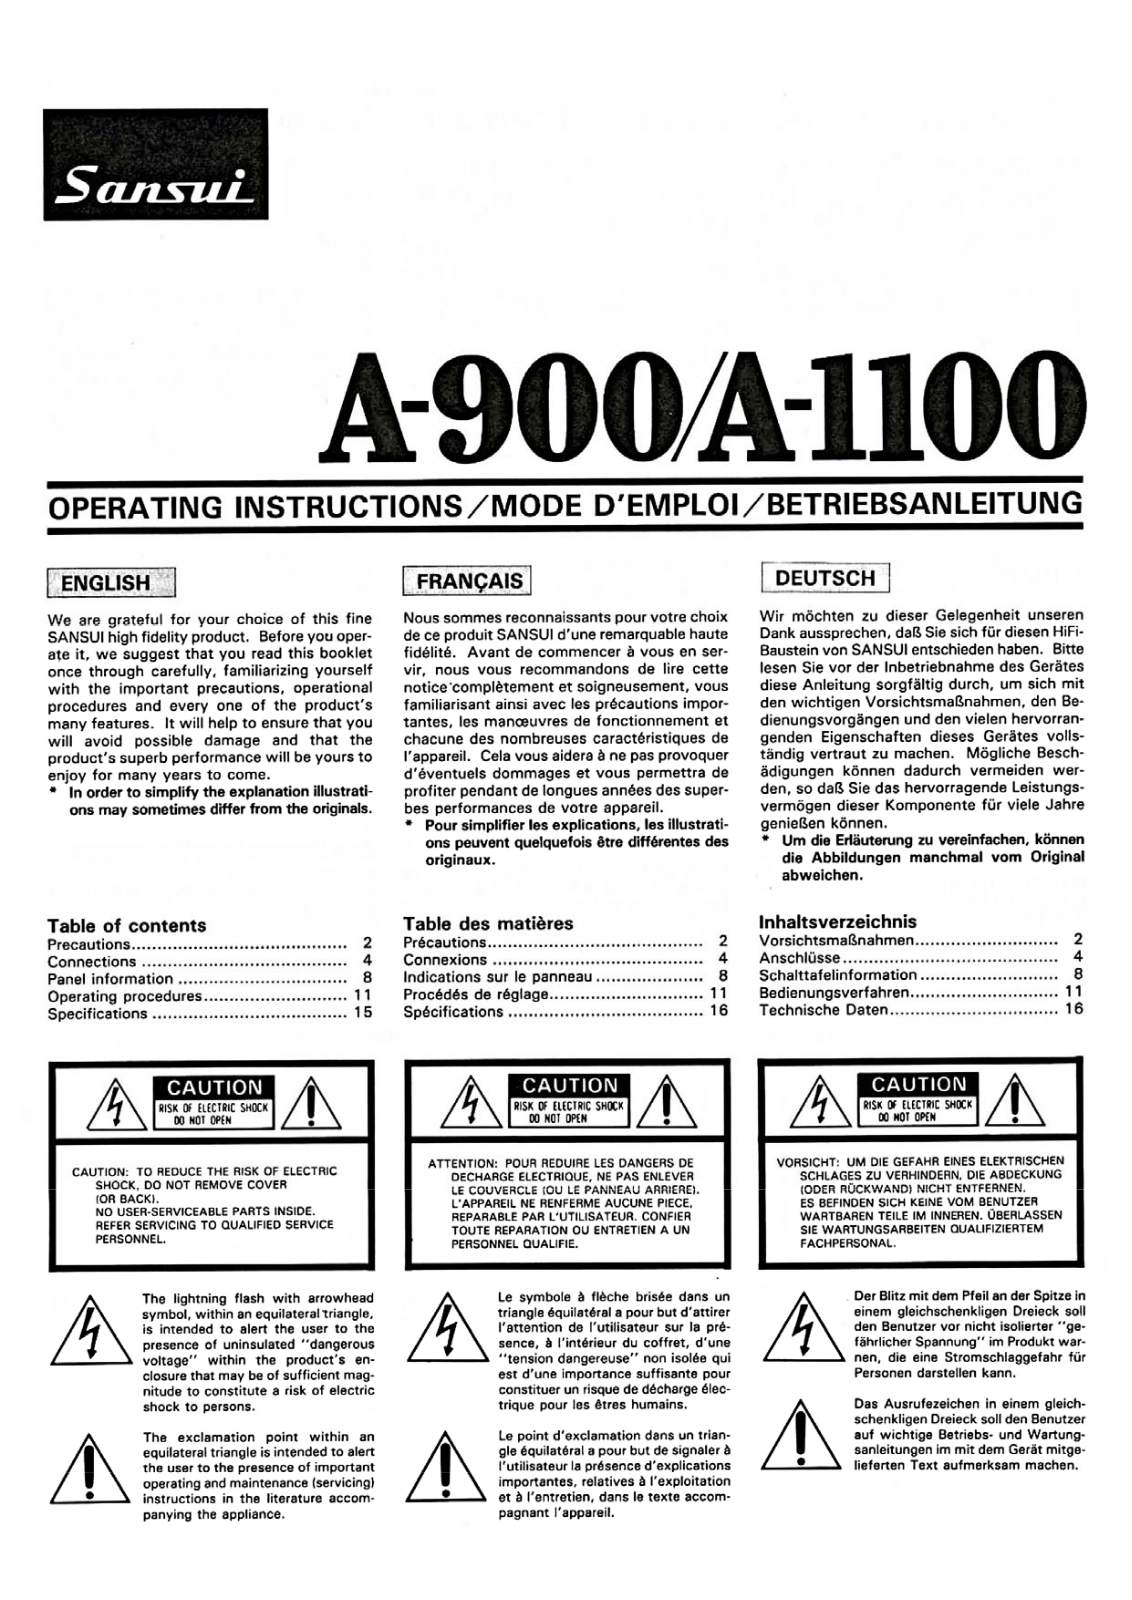 Sansui A-900, A-1100 Owners Manual